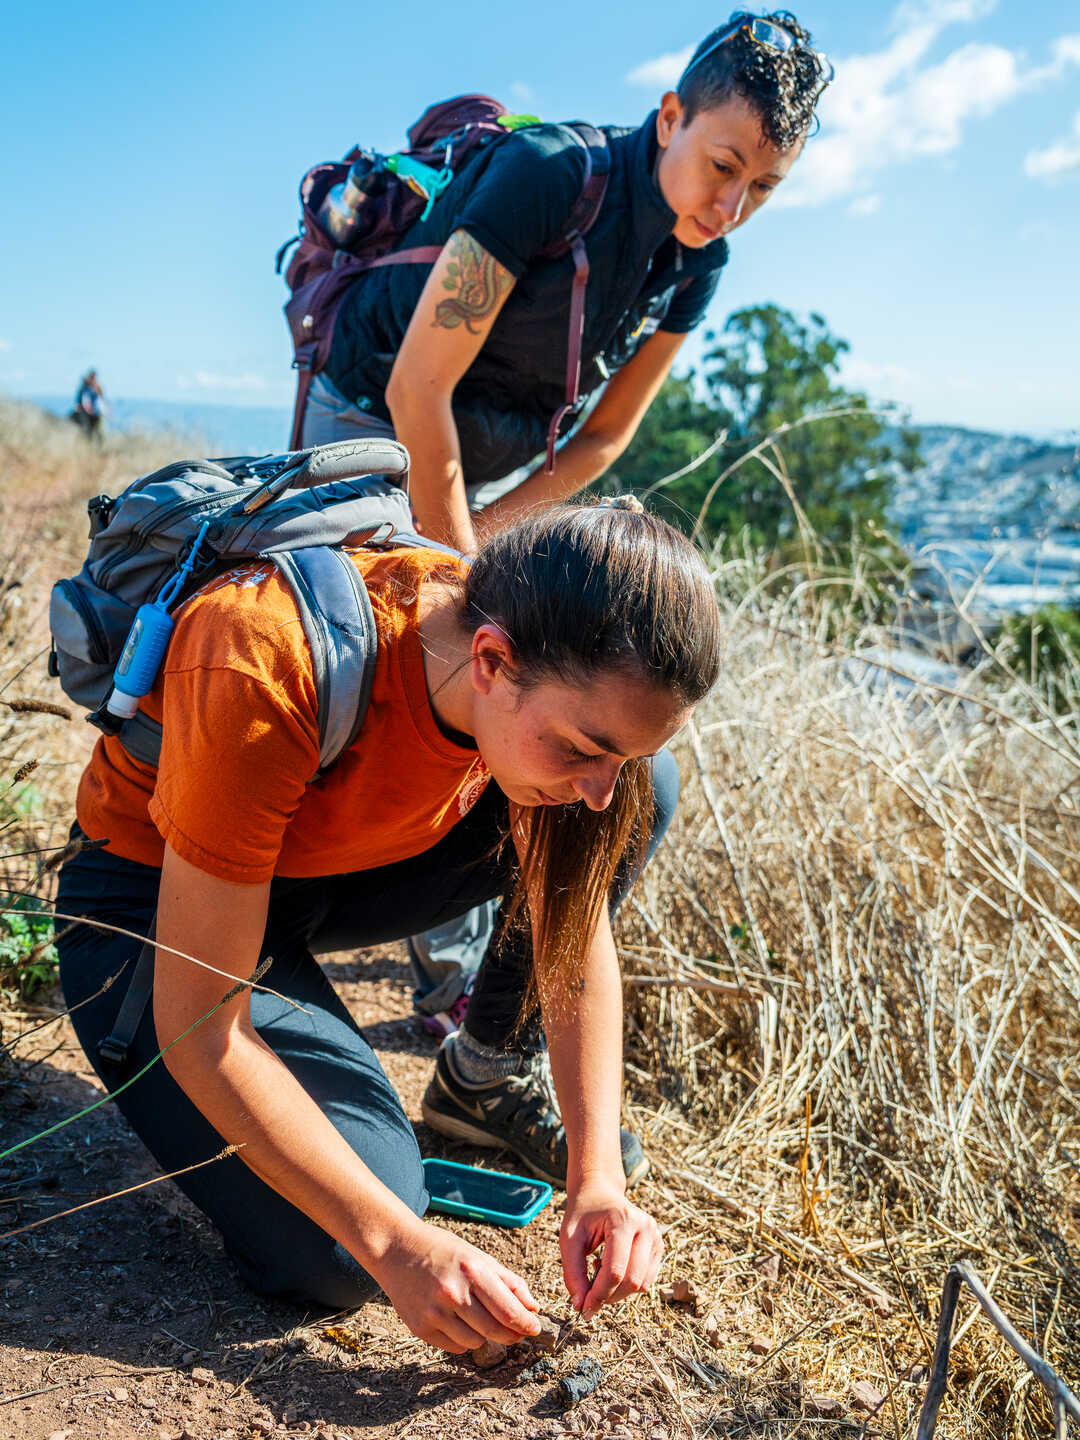 Urban ecologist Tali Caspi collects coyote scat on Bernal Hill while Christine Wilkinson looks on. Photo by Gayle Laird